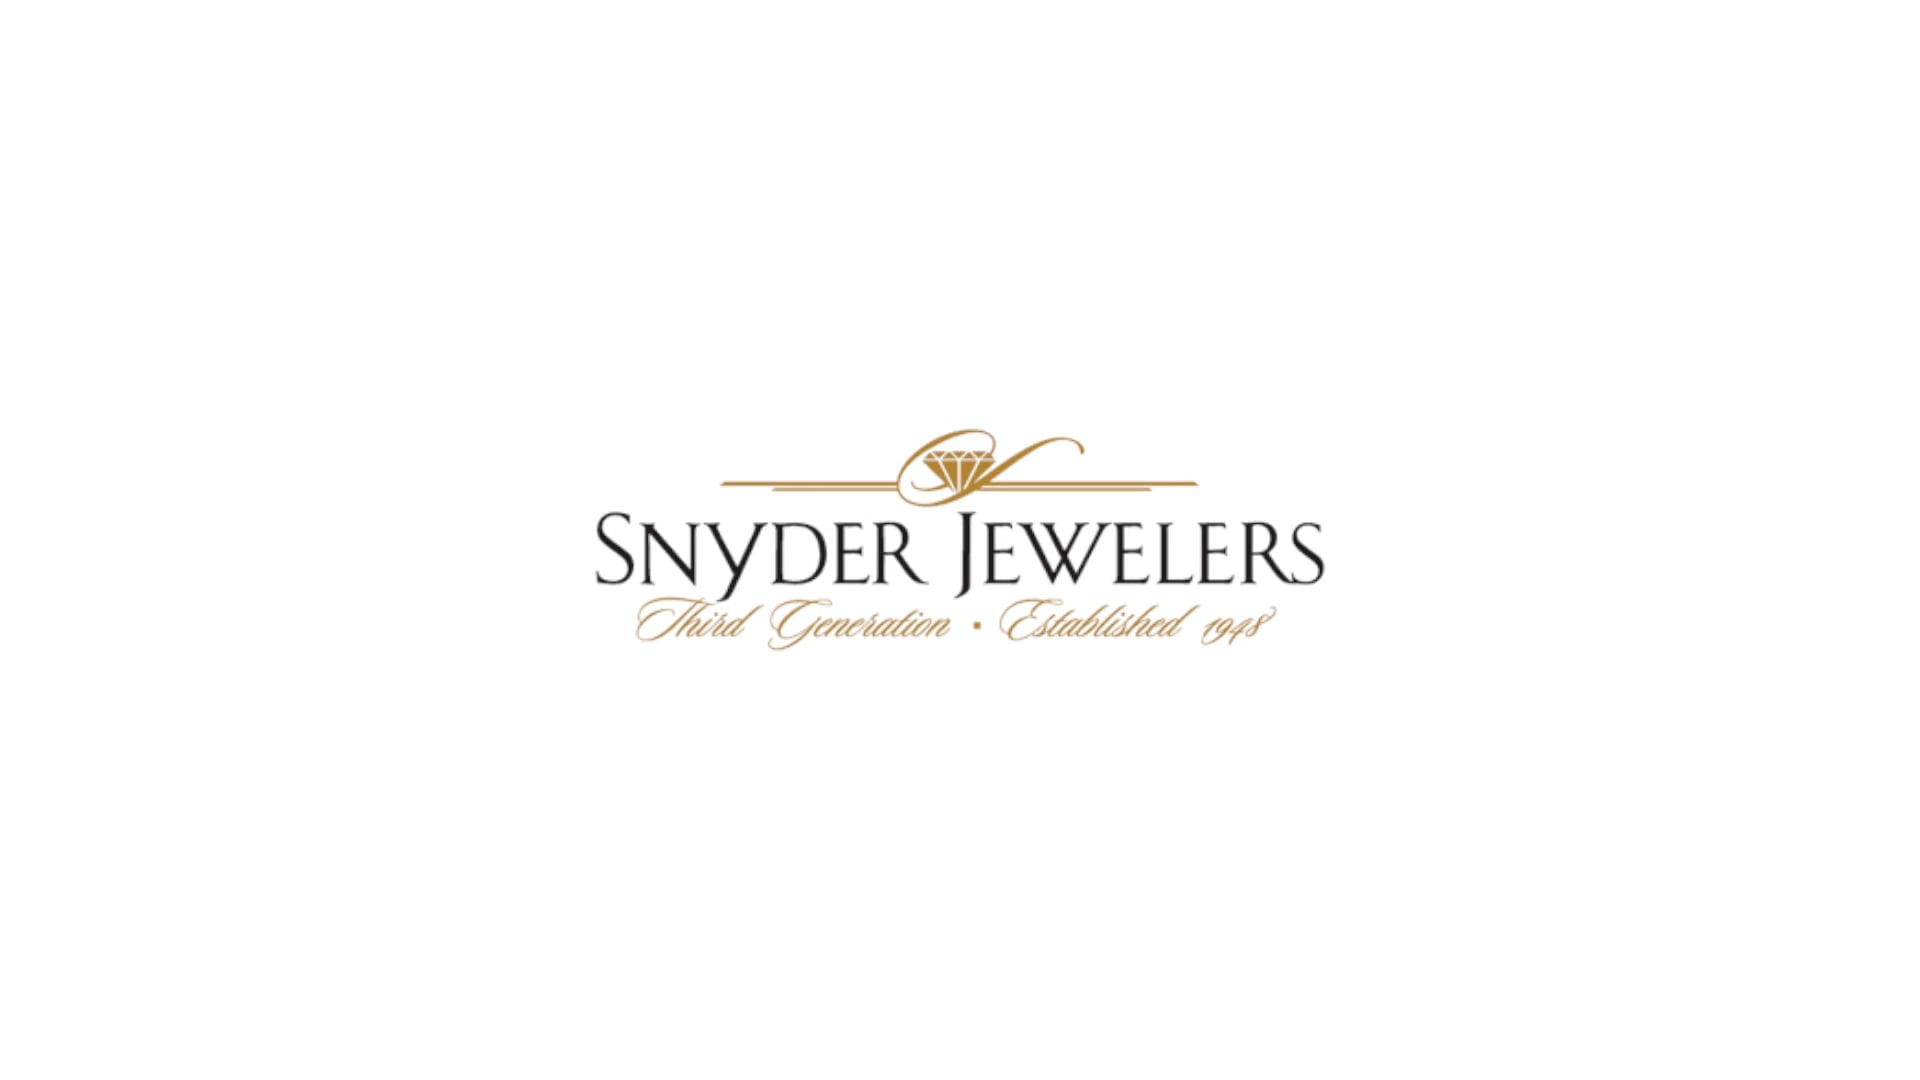 Snyder Jewelers | Trust & Integrity